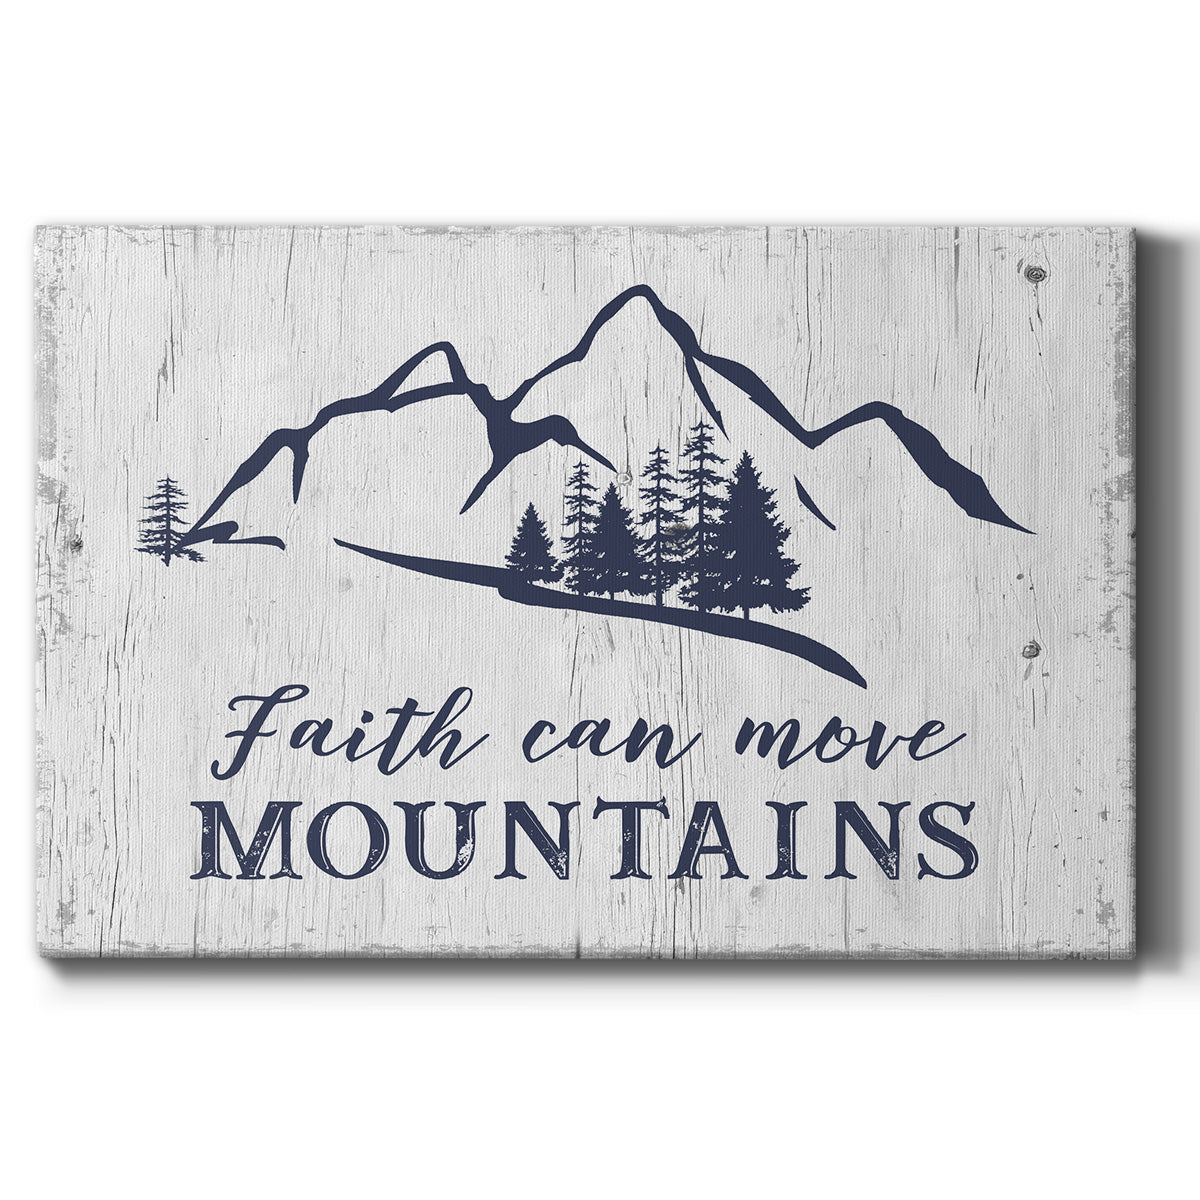 Move Mountains Premium Gallery Wrapped Canvas - Ready to Hang